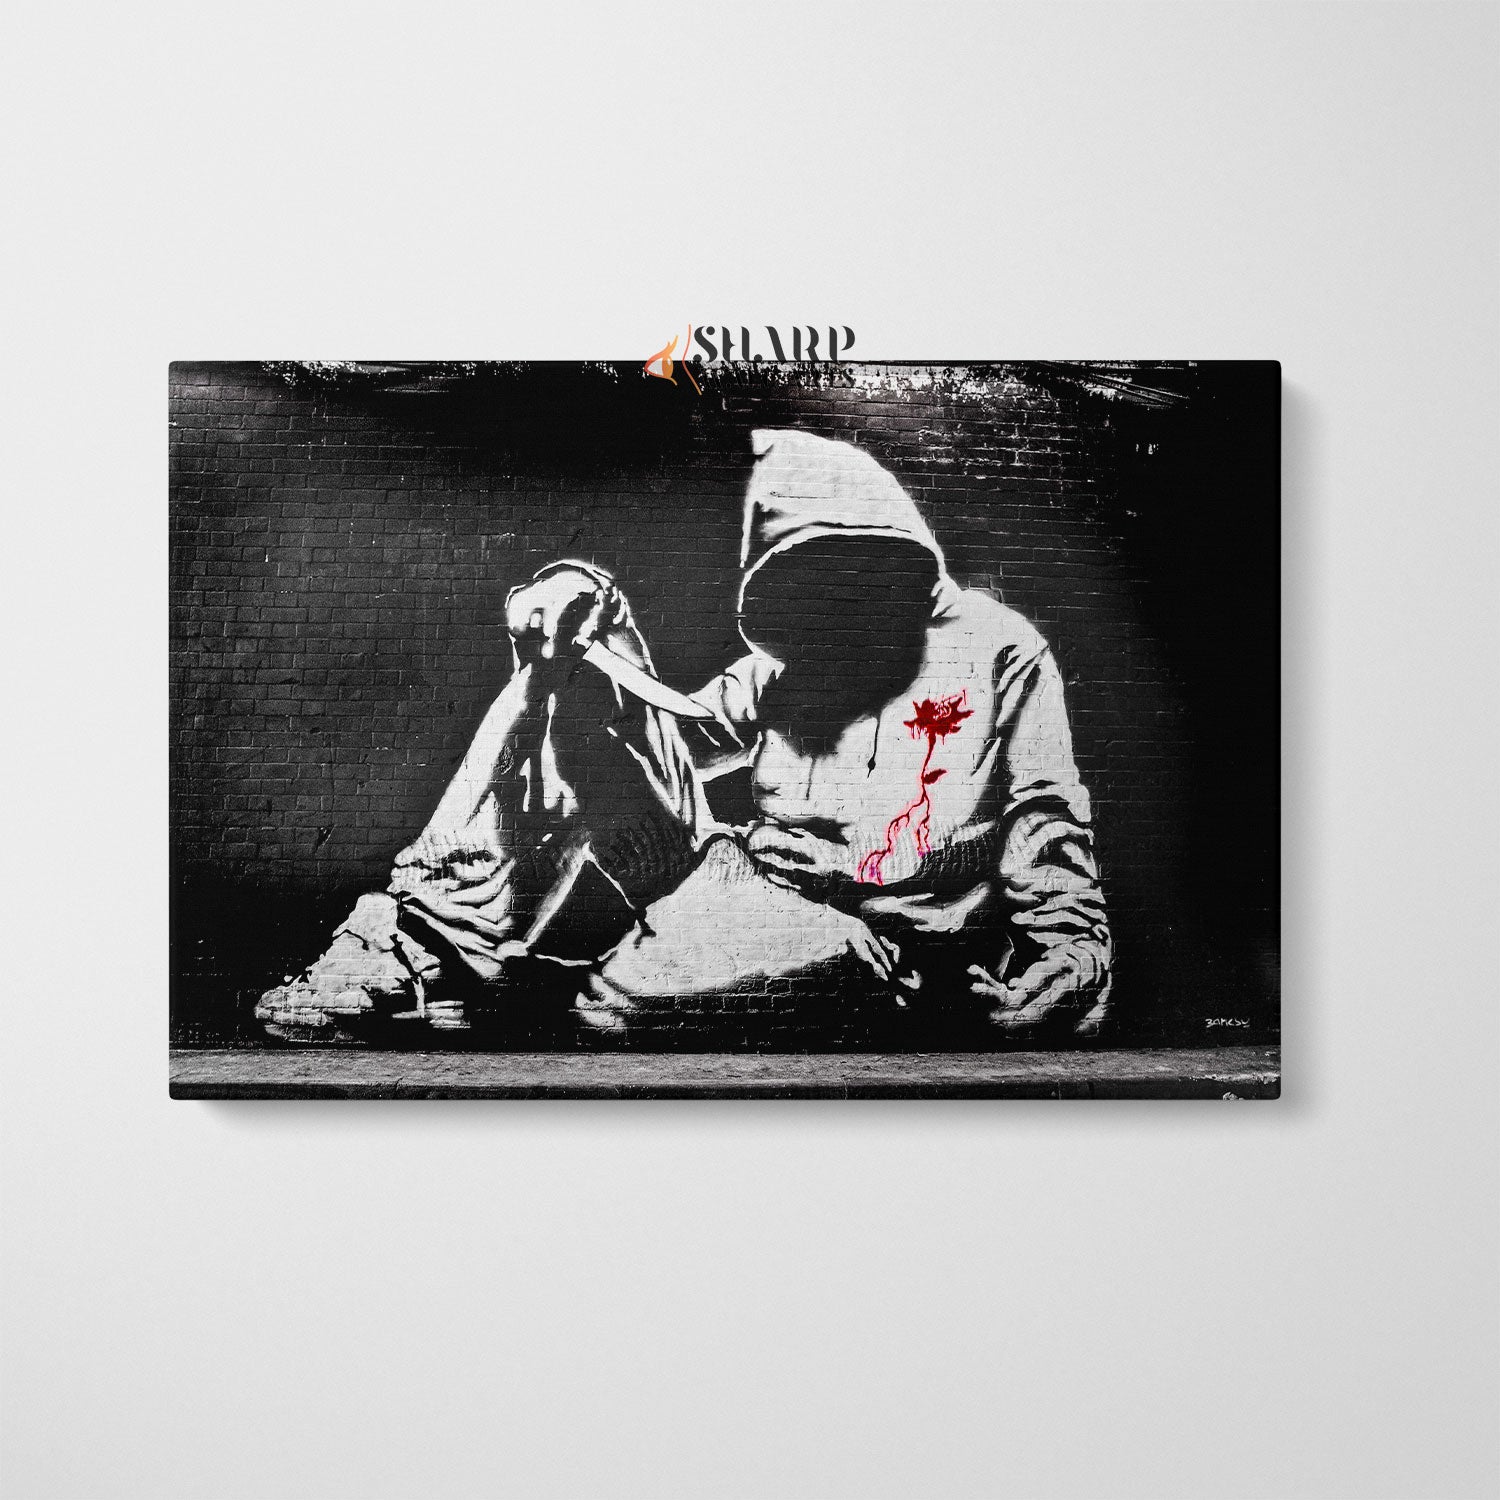 Banksy Hoodie With Knife Canvas Wall Art